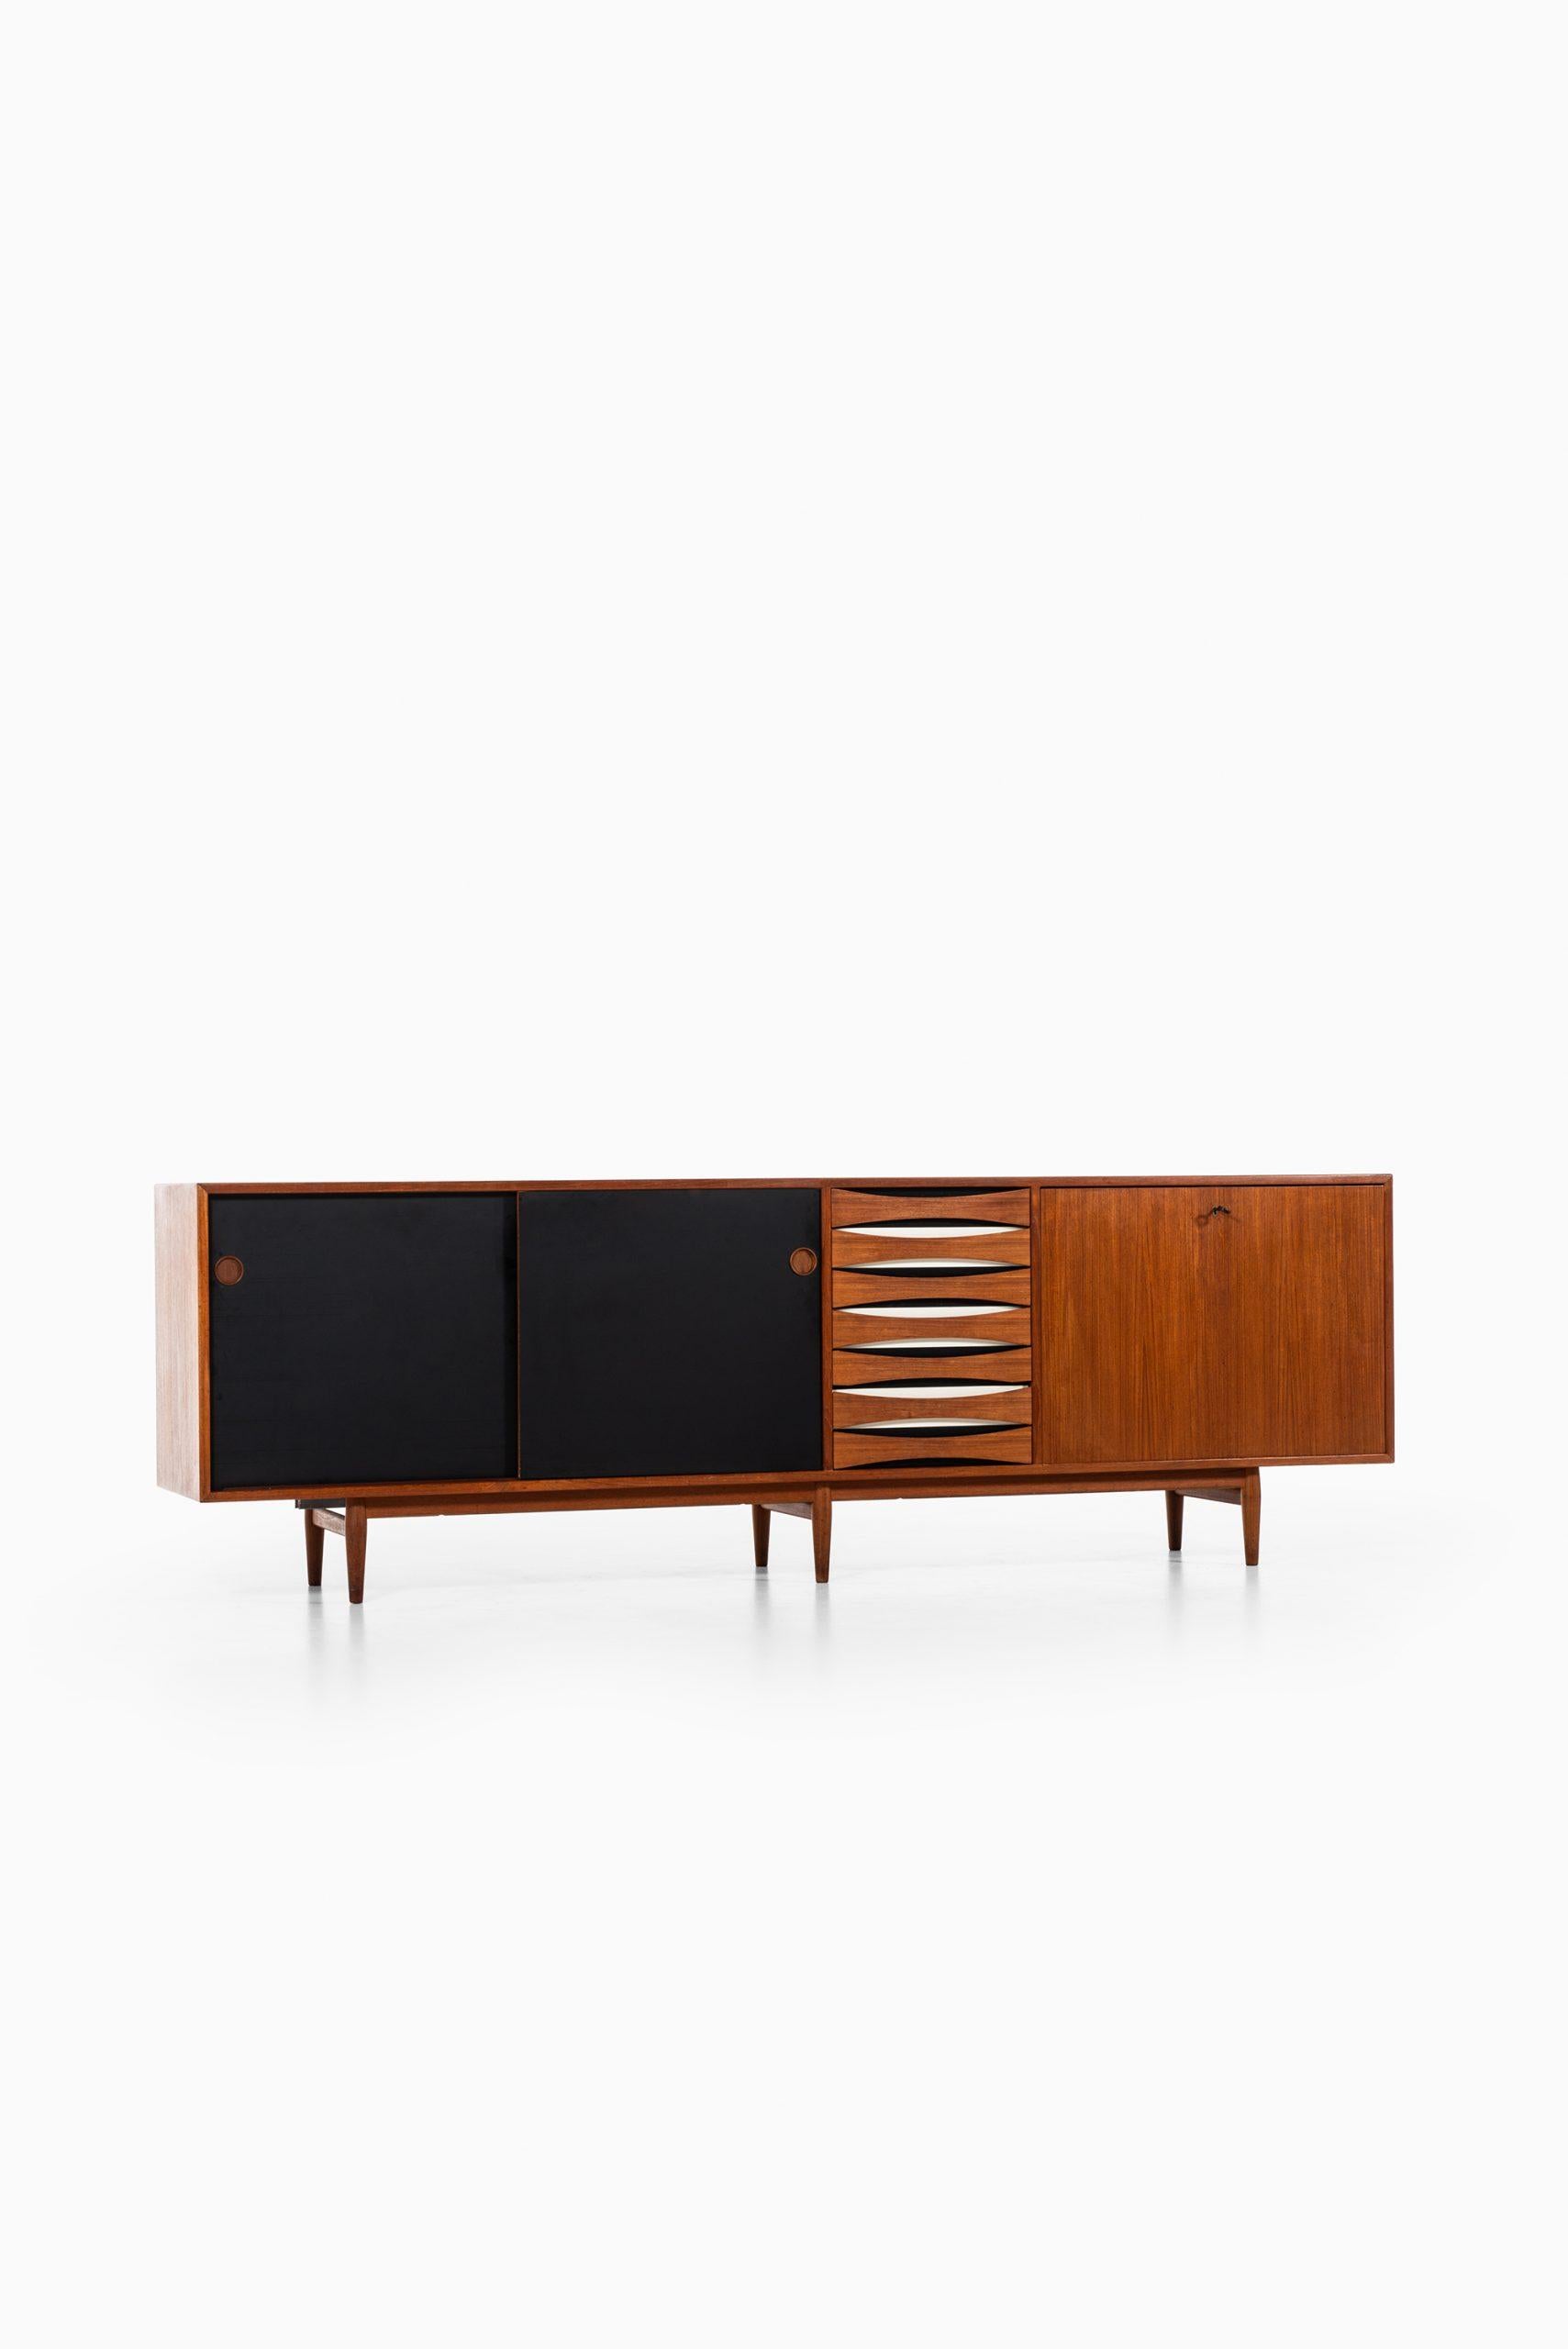 Mid-20th Century Arne Vodder Sideboard Model 29A Produced by Sibast in Denmark